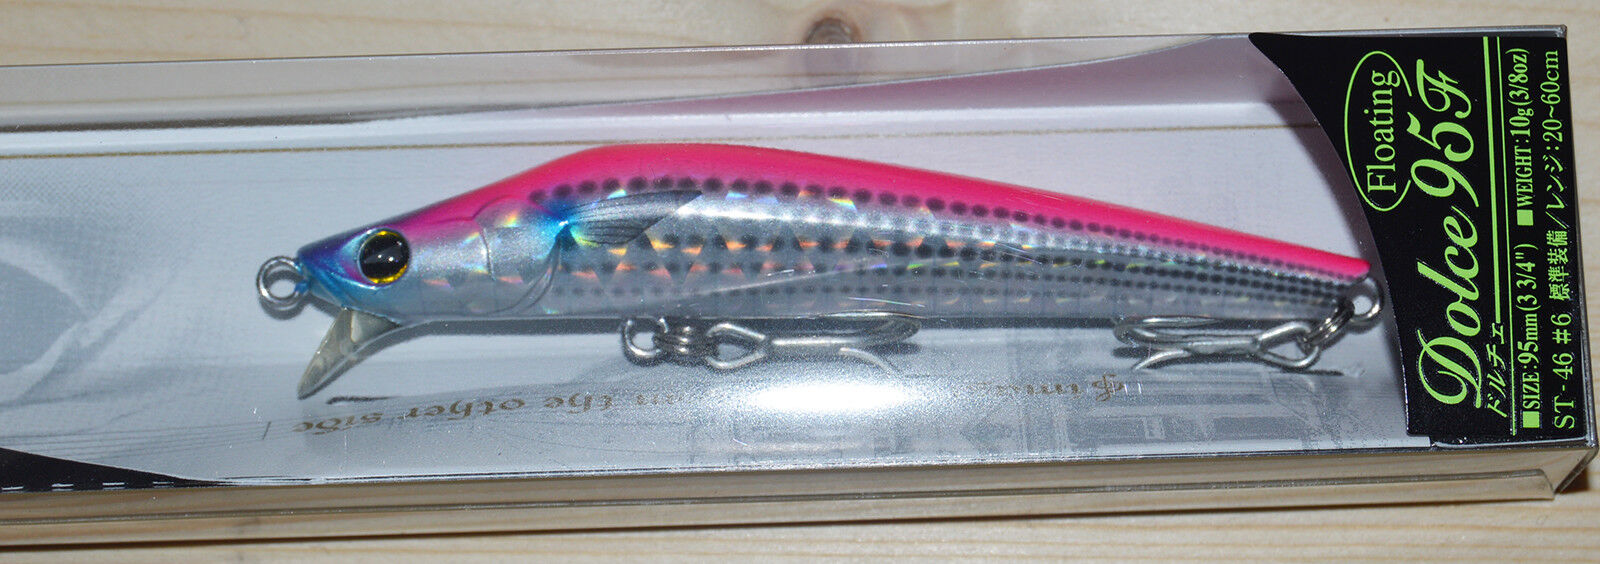 ARTIFICIAL LURES YO-ZURI DUEL DOLCE F881 Overseas parallel import regular item Fees free!! color DHH 10gr - F 95mm